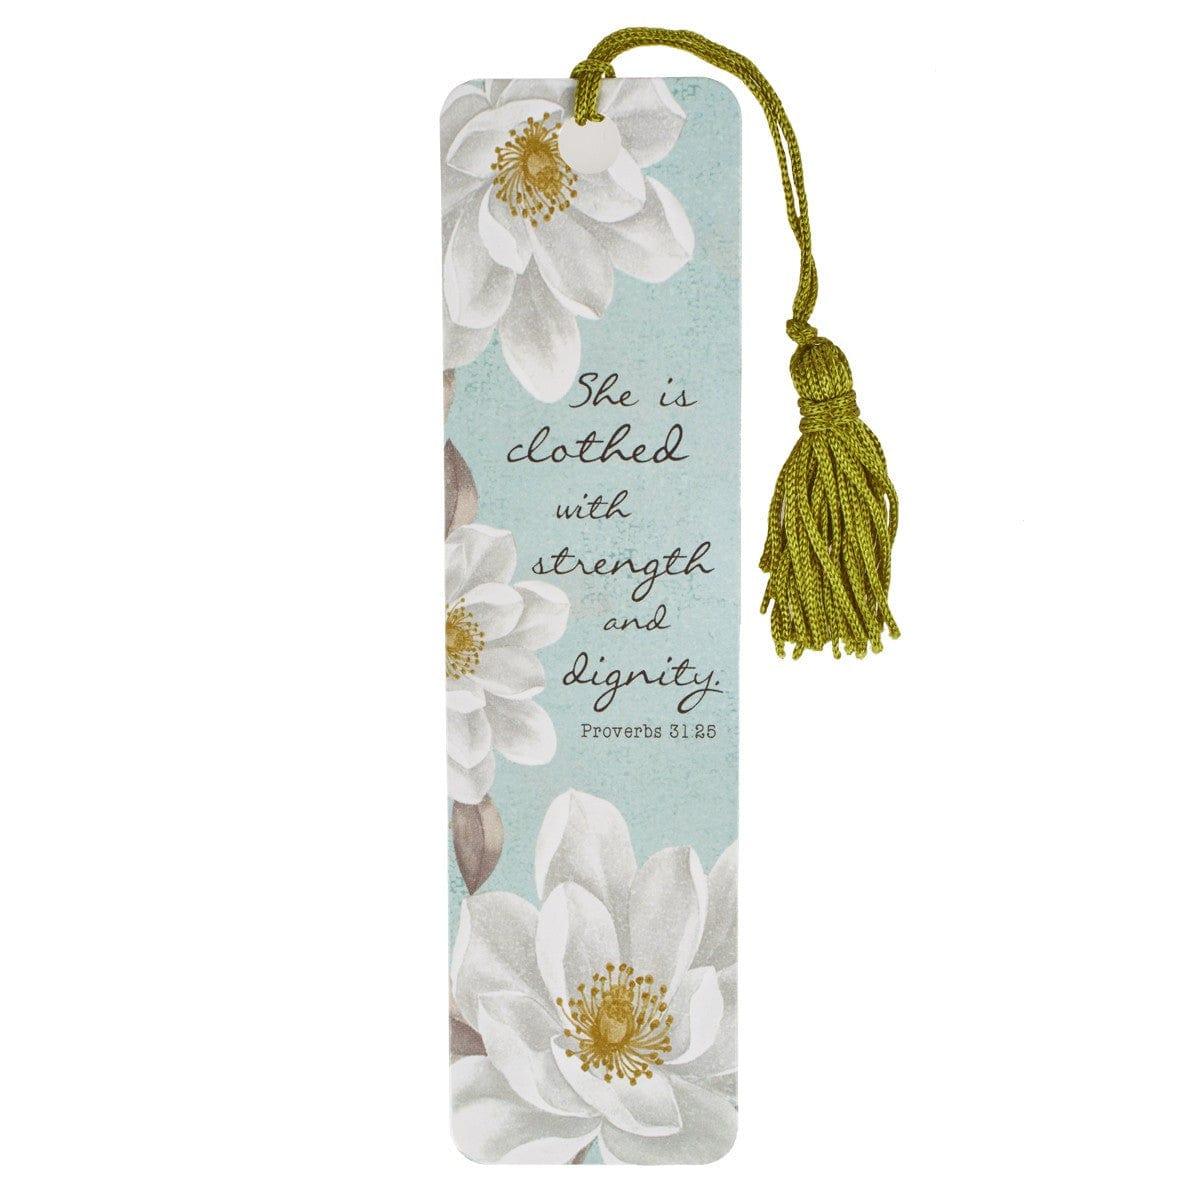 She Is Clothed with Strength and Dignity Bookmark with Tassel - Proverbs 31:25 - Pura Vida Books